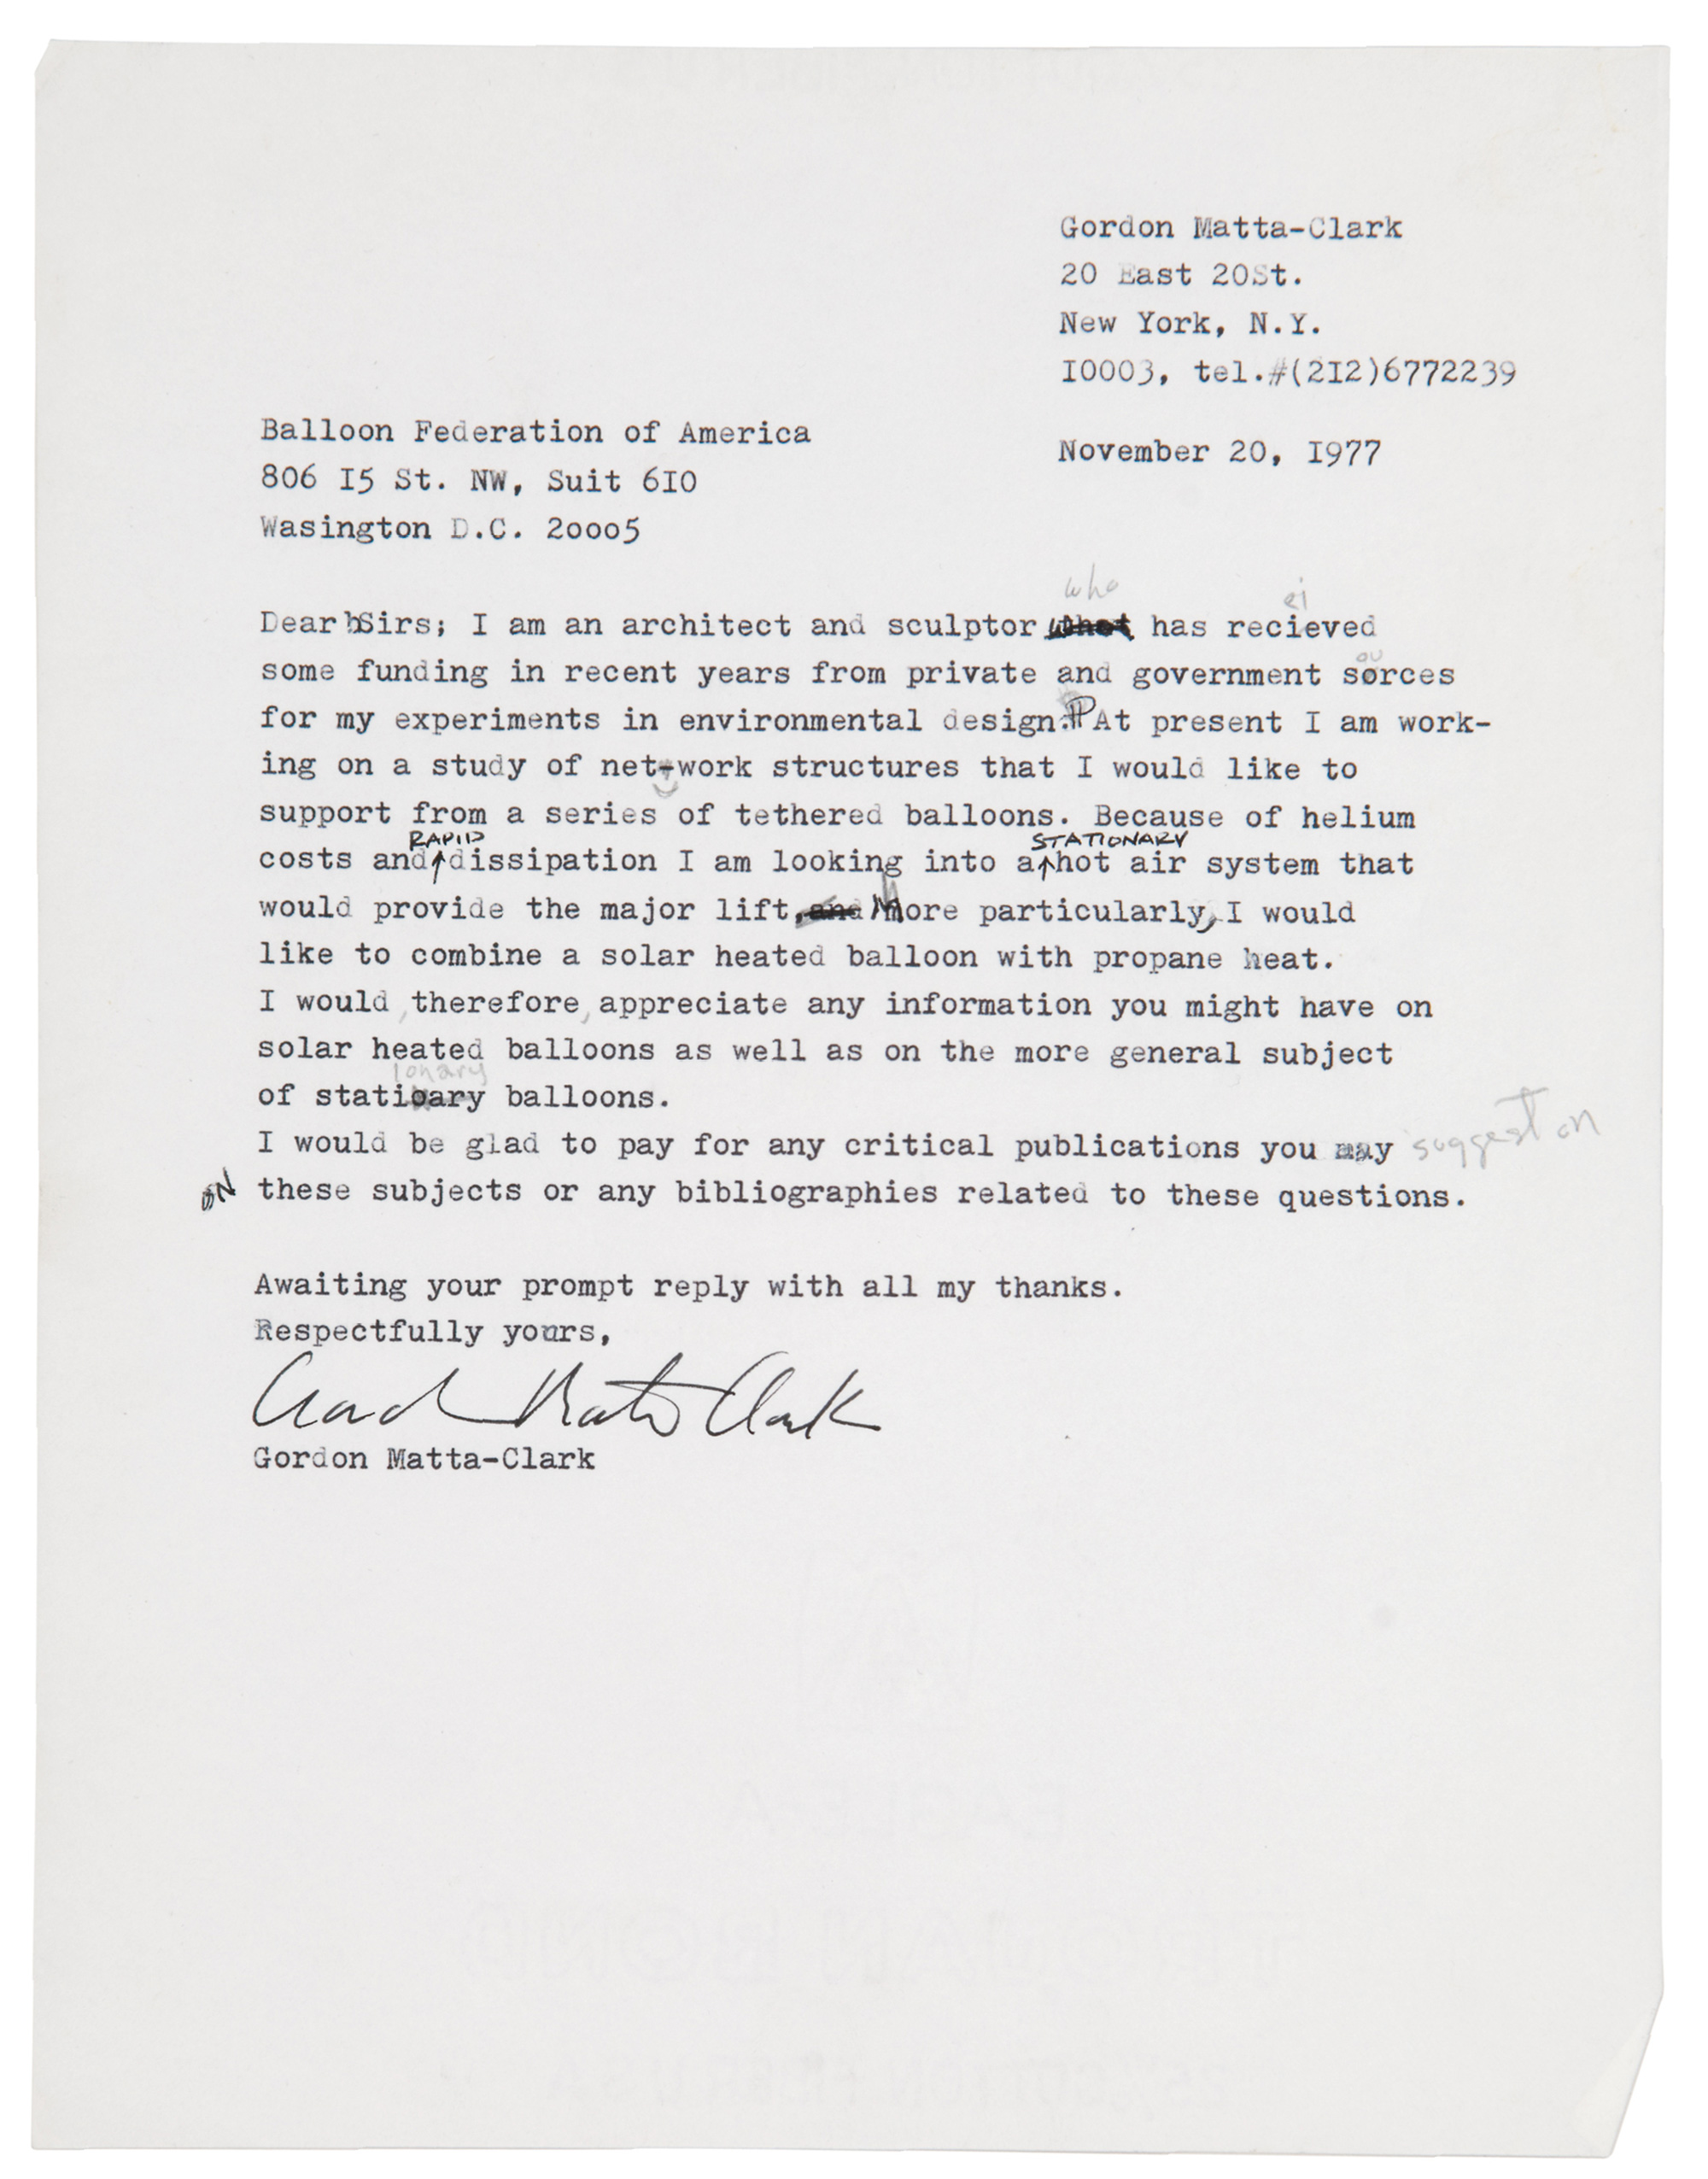 A 1977 letter from Gordon Matta-Clark to the Balloon Federation of America. 